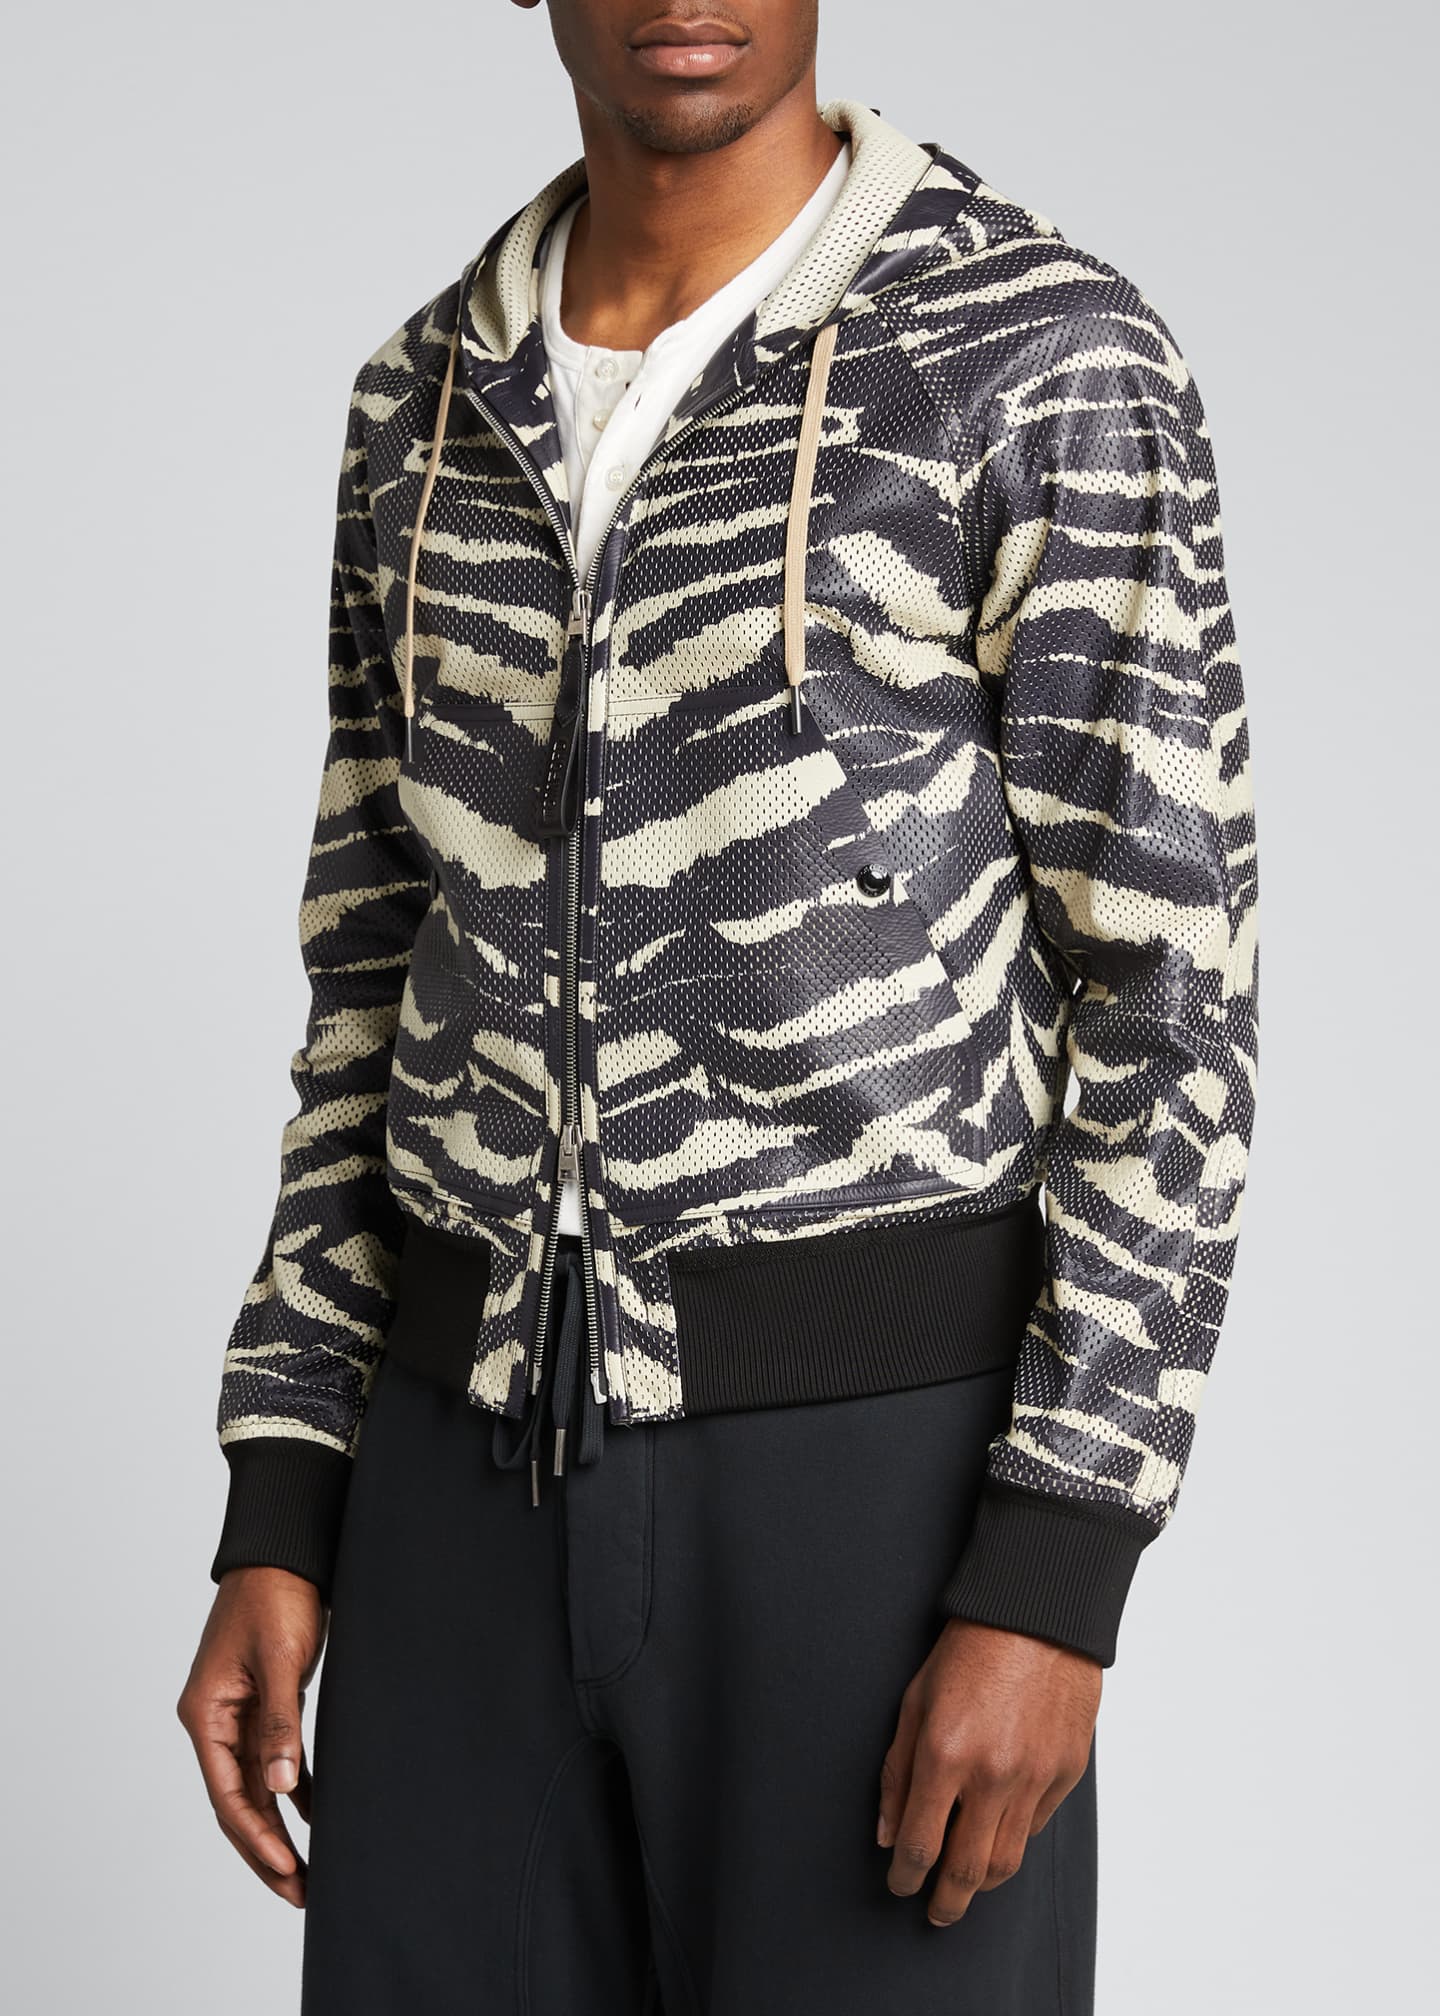 TOM FORD Men's Zebra-Print Perforated Leather Hooded Jacket - Bergdorf ...